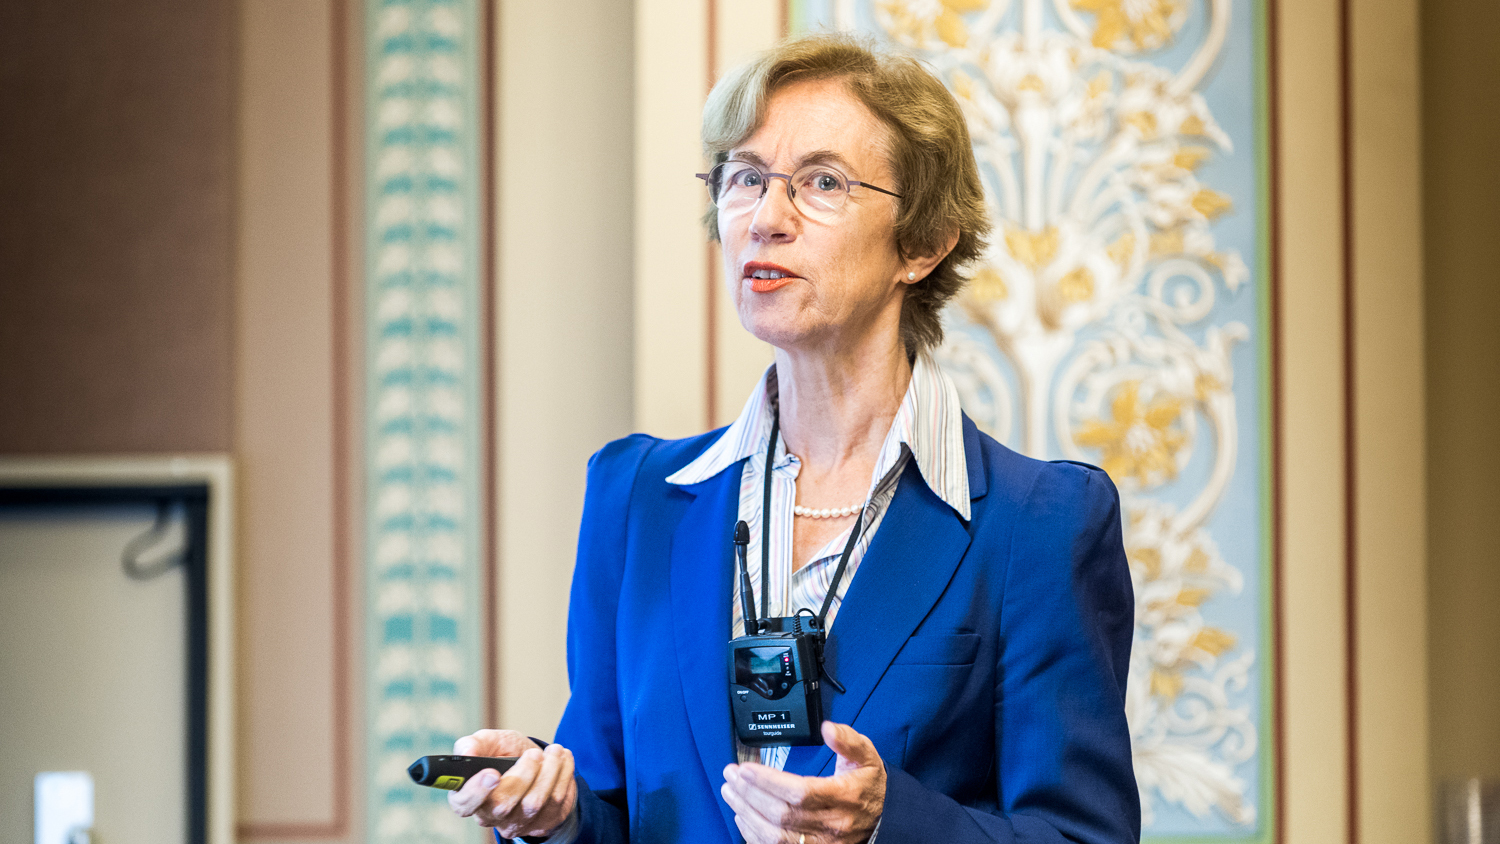 Professor Klara Landau, Director of the Department of Ophthalmology at the UniversityHospital, described the current situation: “A disproportionate number of women leave academia after their doctorates.” (Picture: Frank Brüderli)